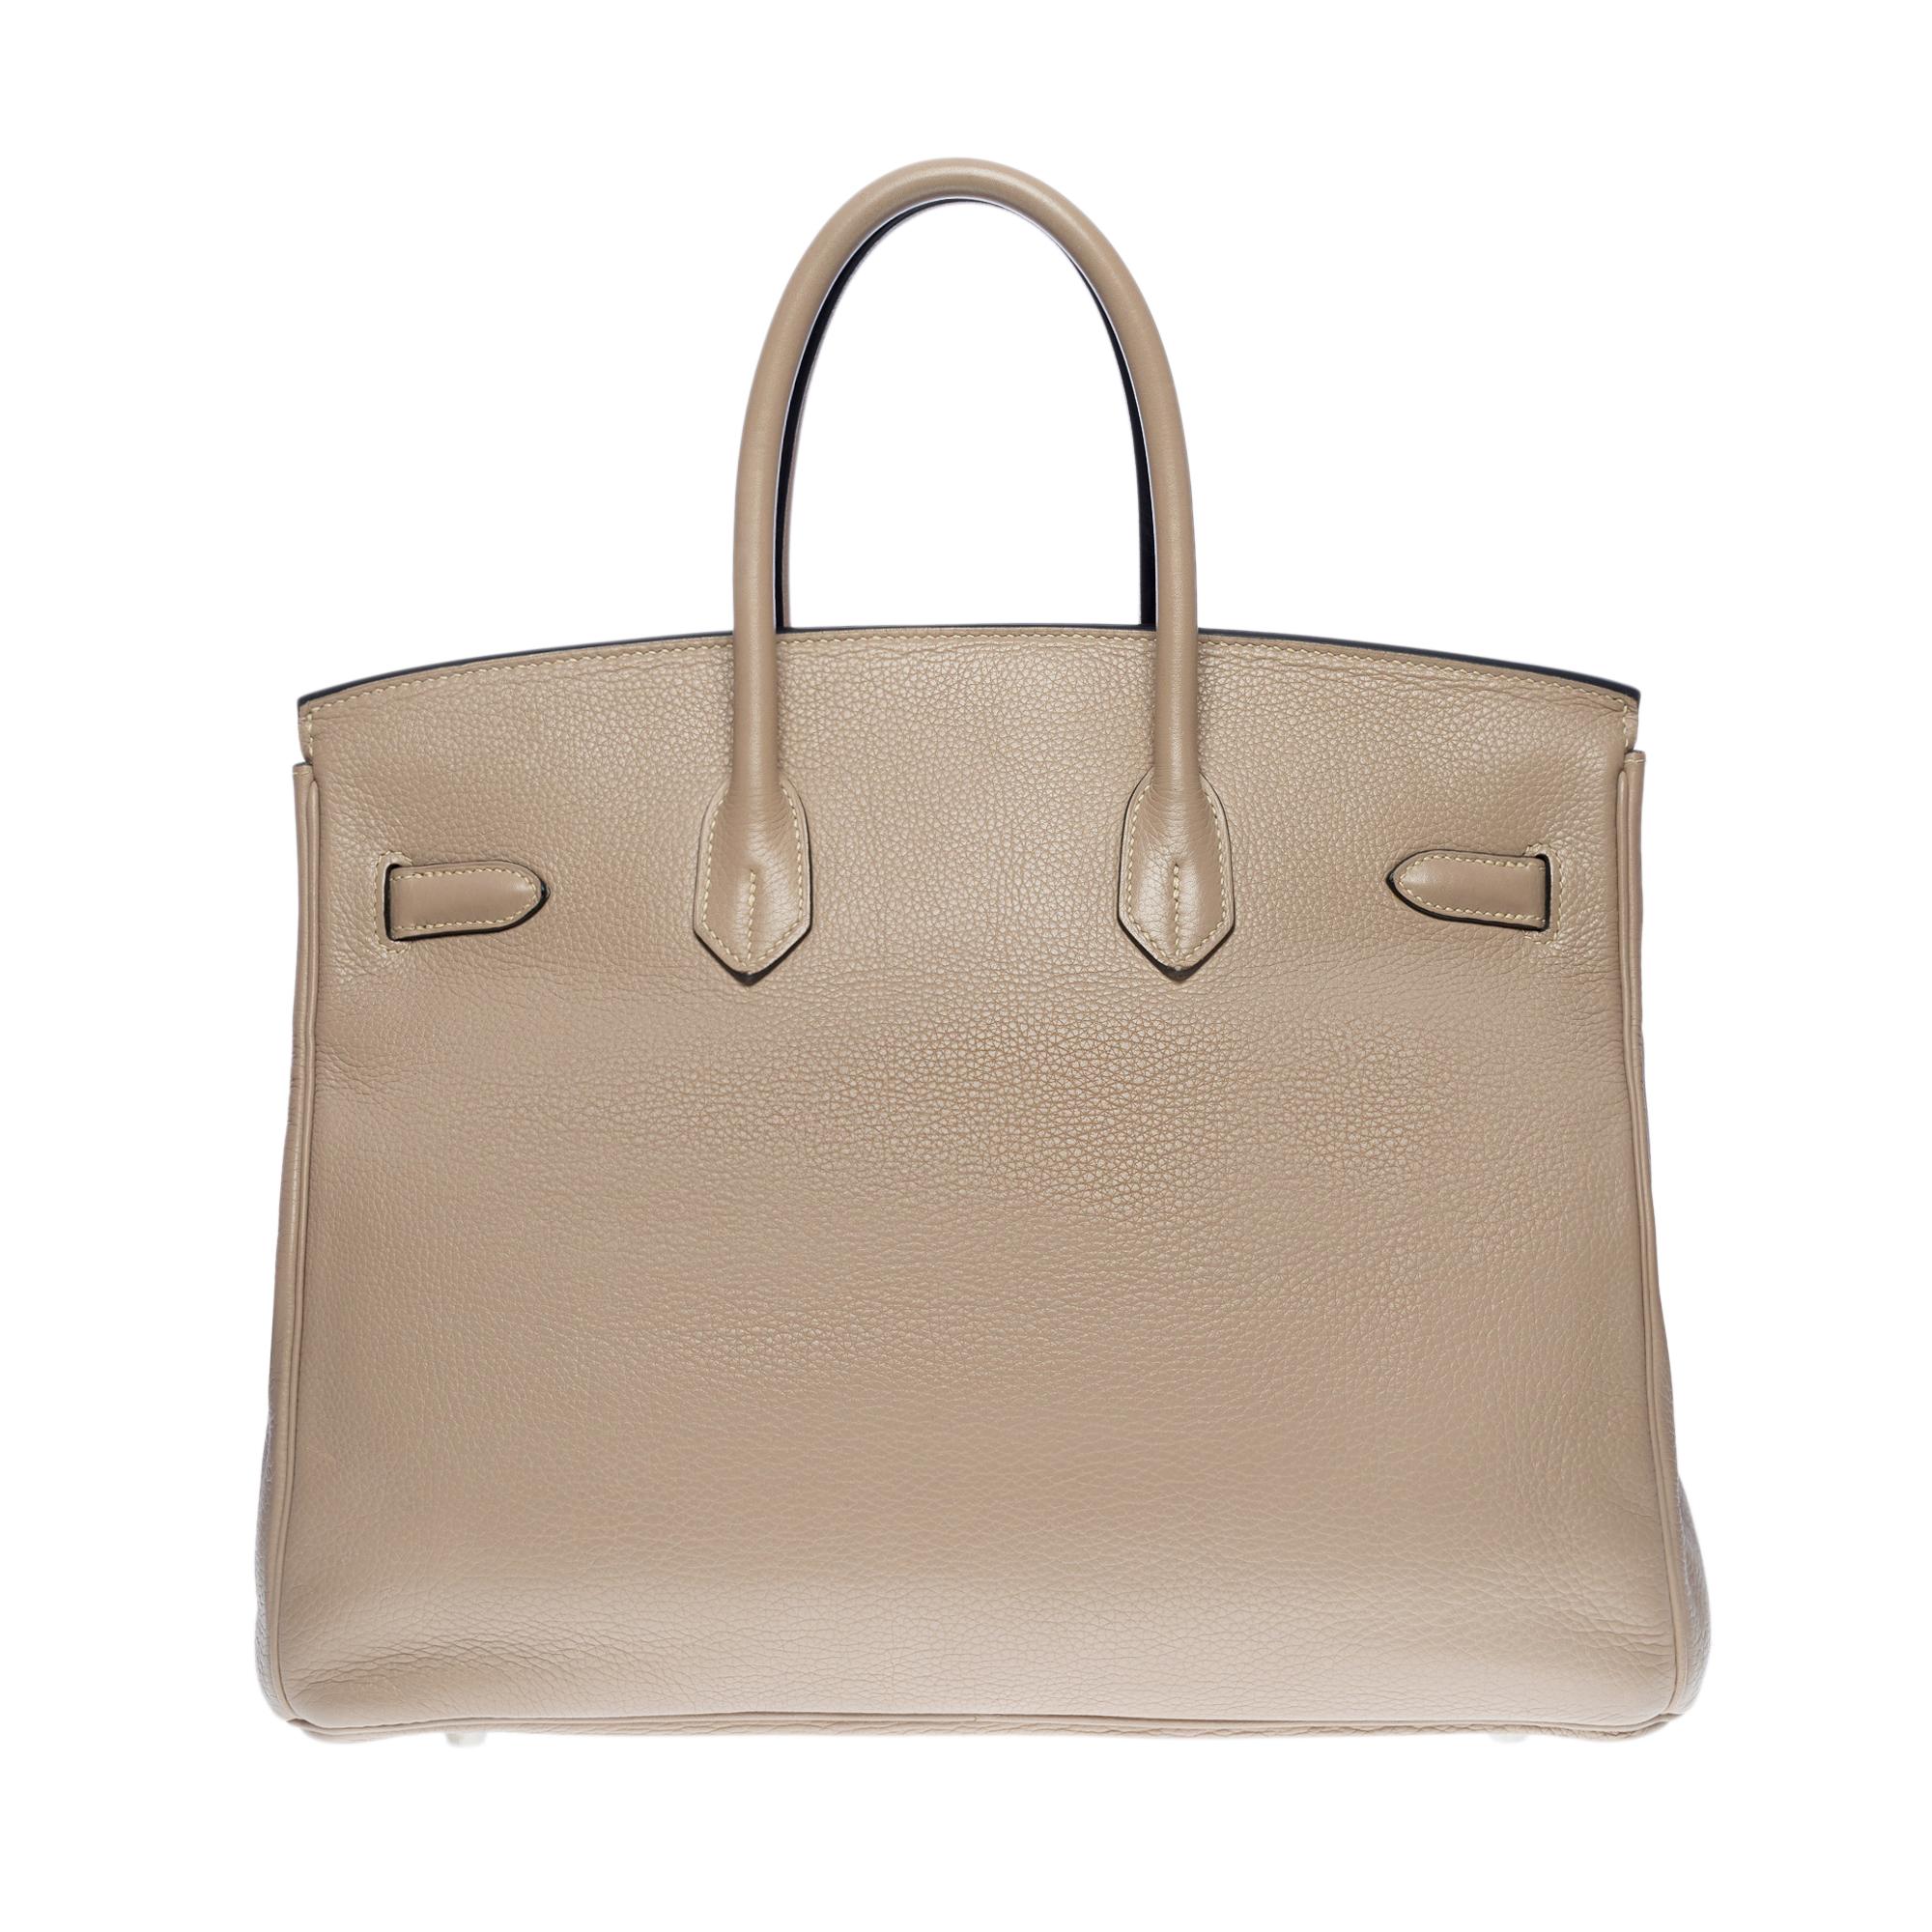 Superb Hermes Birkin 35 cm handbag in dove gray Togo leather, hardware in Palladium silver metal, double handle in gray leather allowing the bag to be worn in the hand

Flap closure
Lining in gray leather, one zip pocket, one patch pocket
Signature: